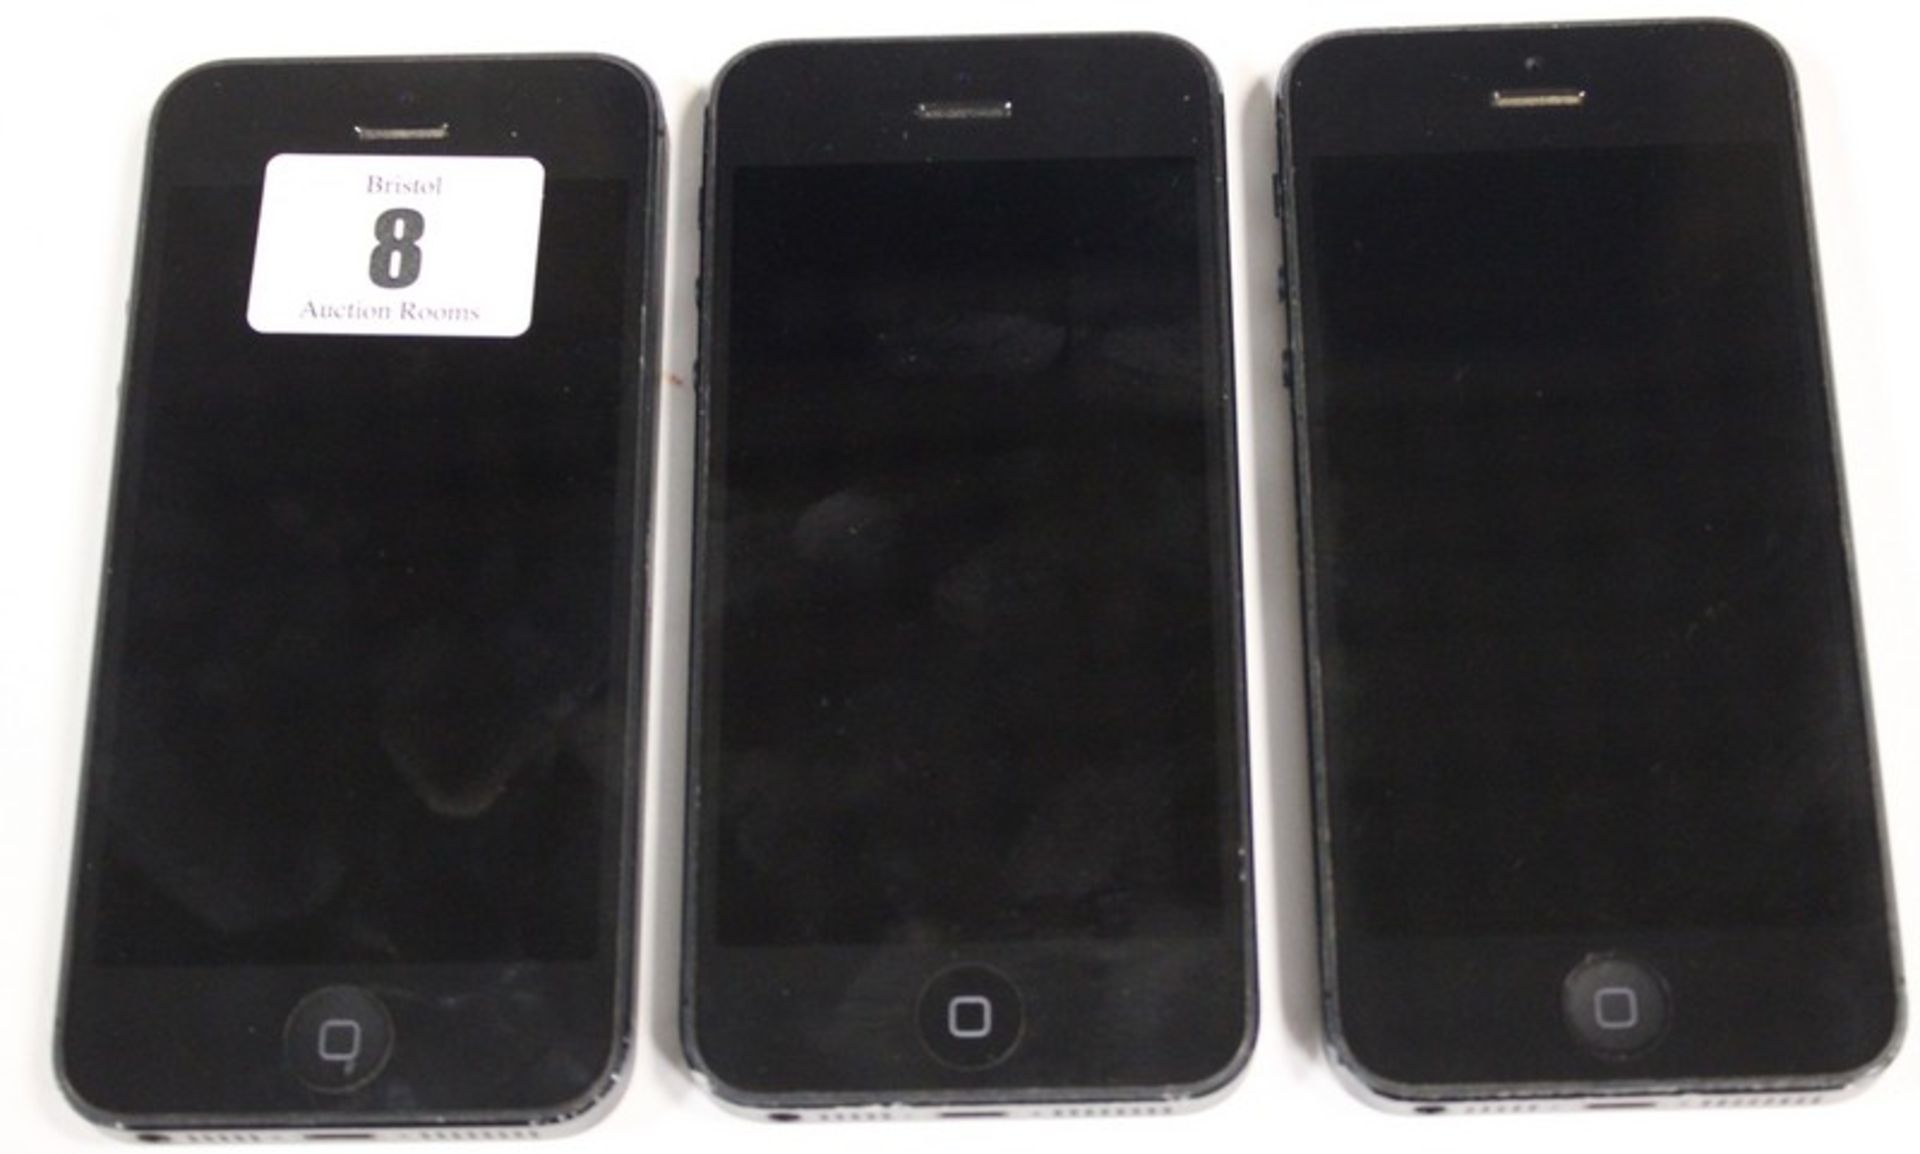 Three iPhone 5 A1429 imei: 013737003098813, 013626003251037 and 013345001350945 (Activation locked).